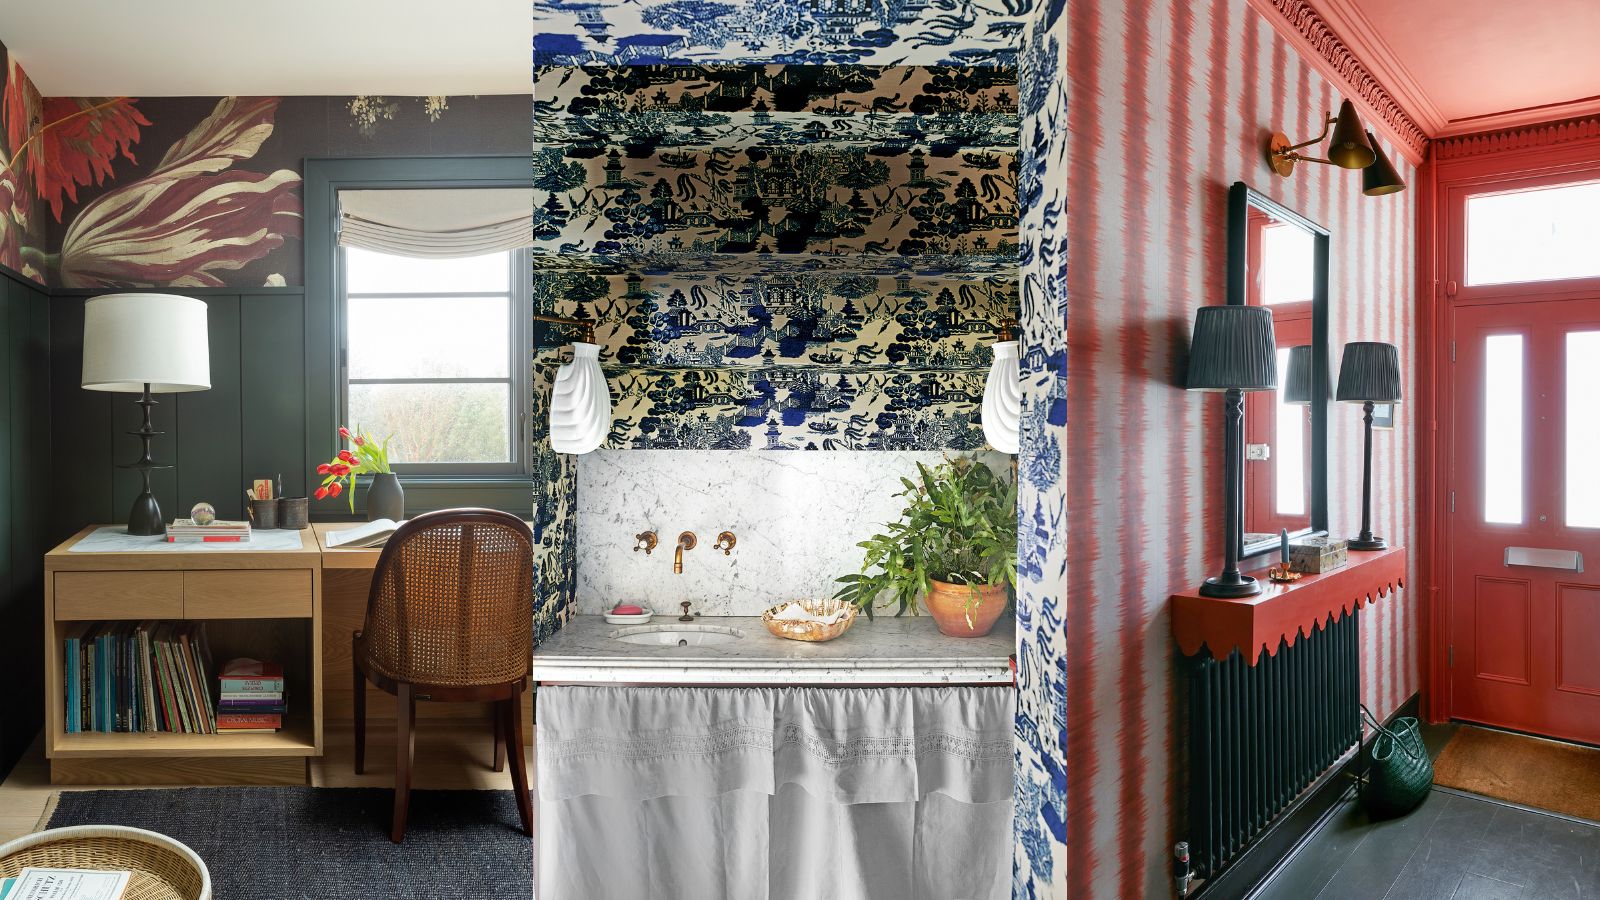 How to Decorate with Wallpaper - Tips for Using Wallpaper in Homes